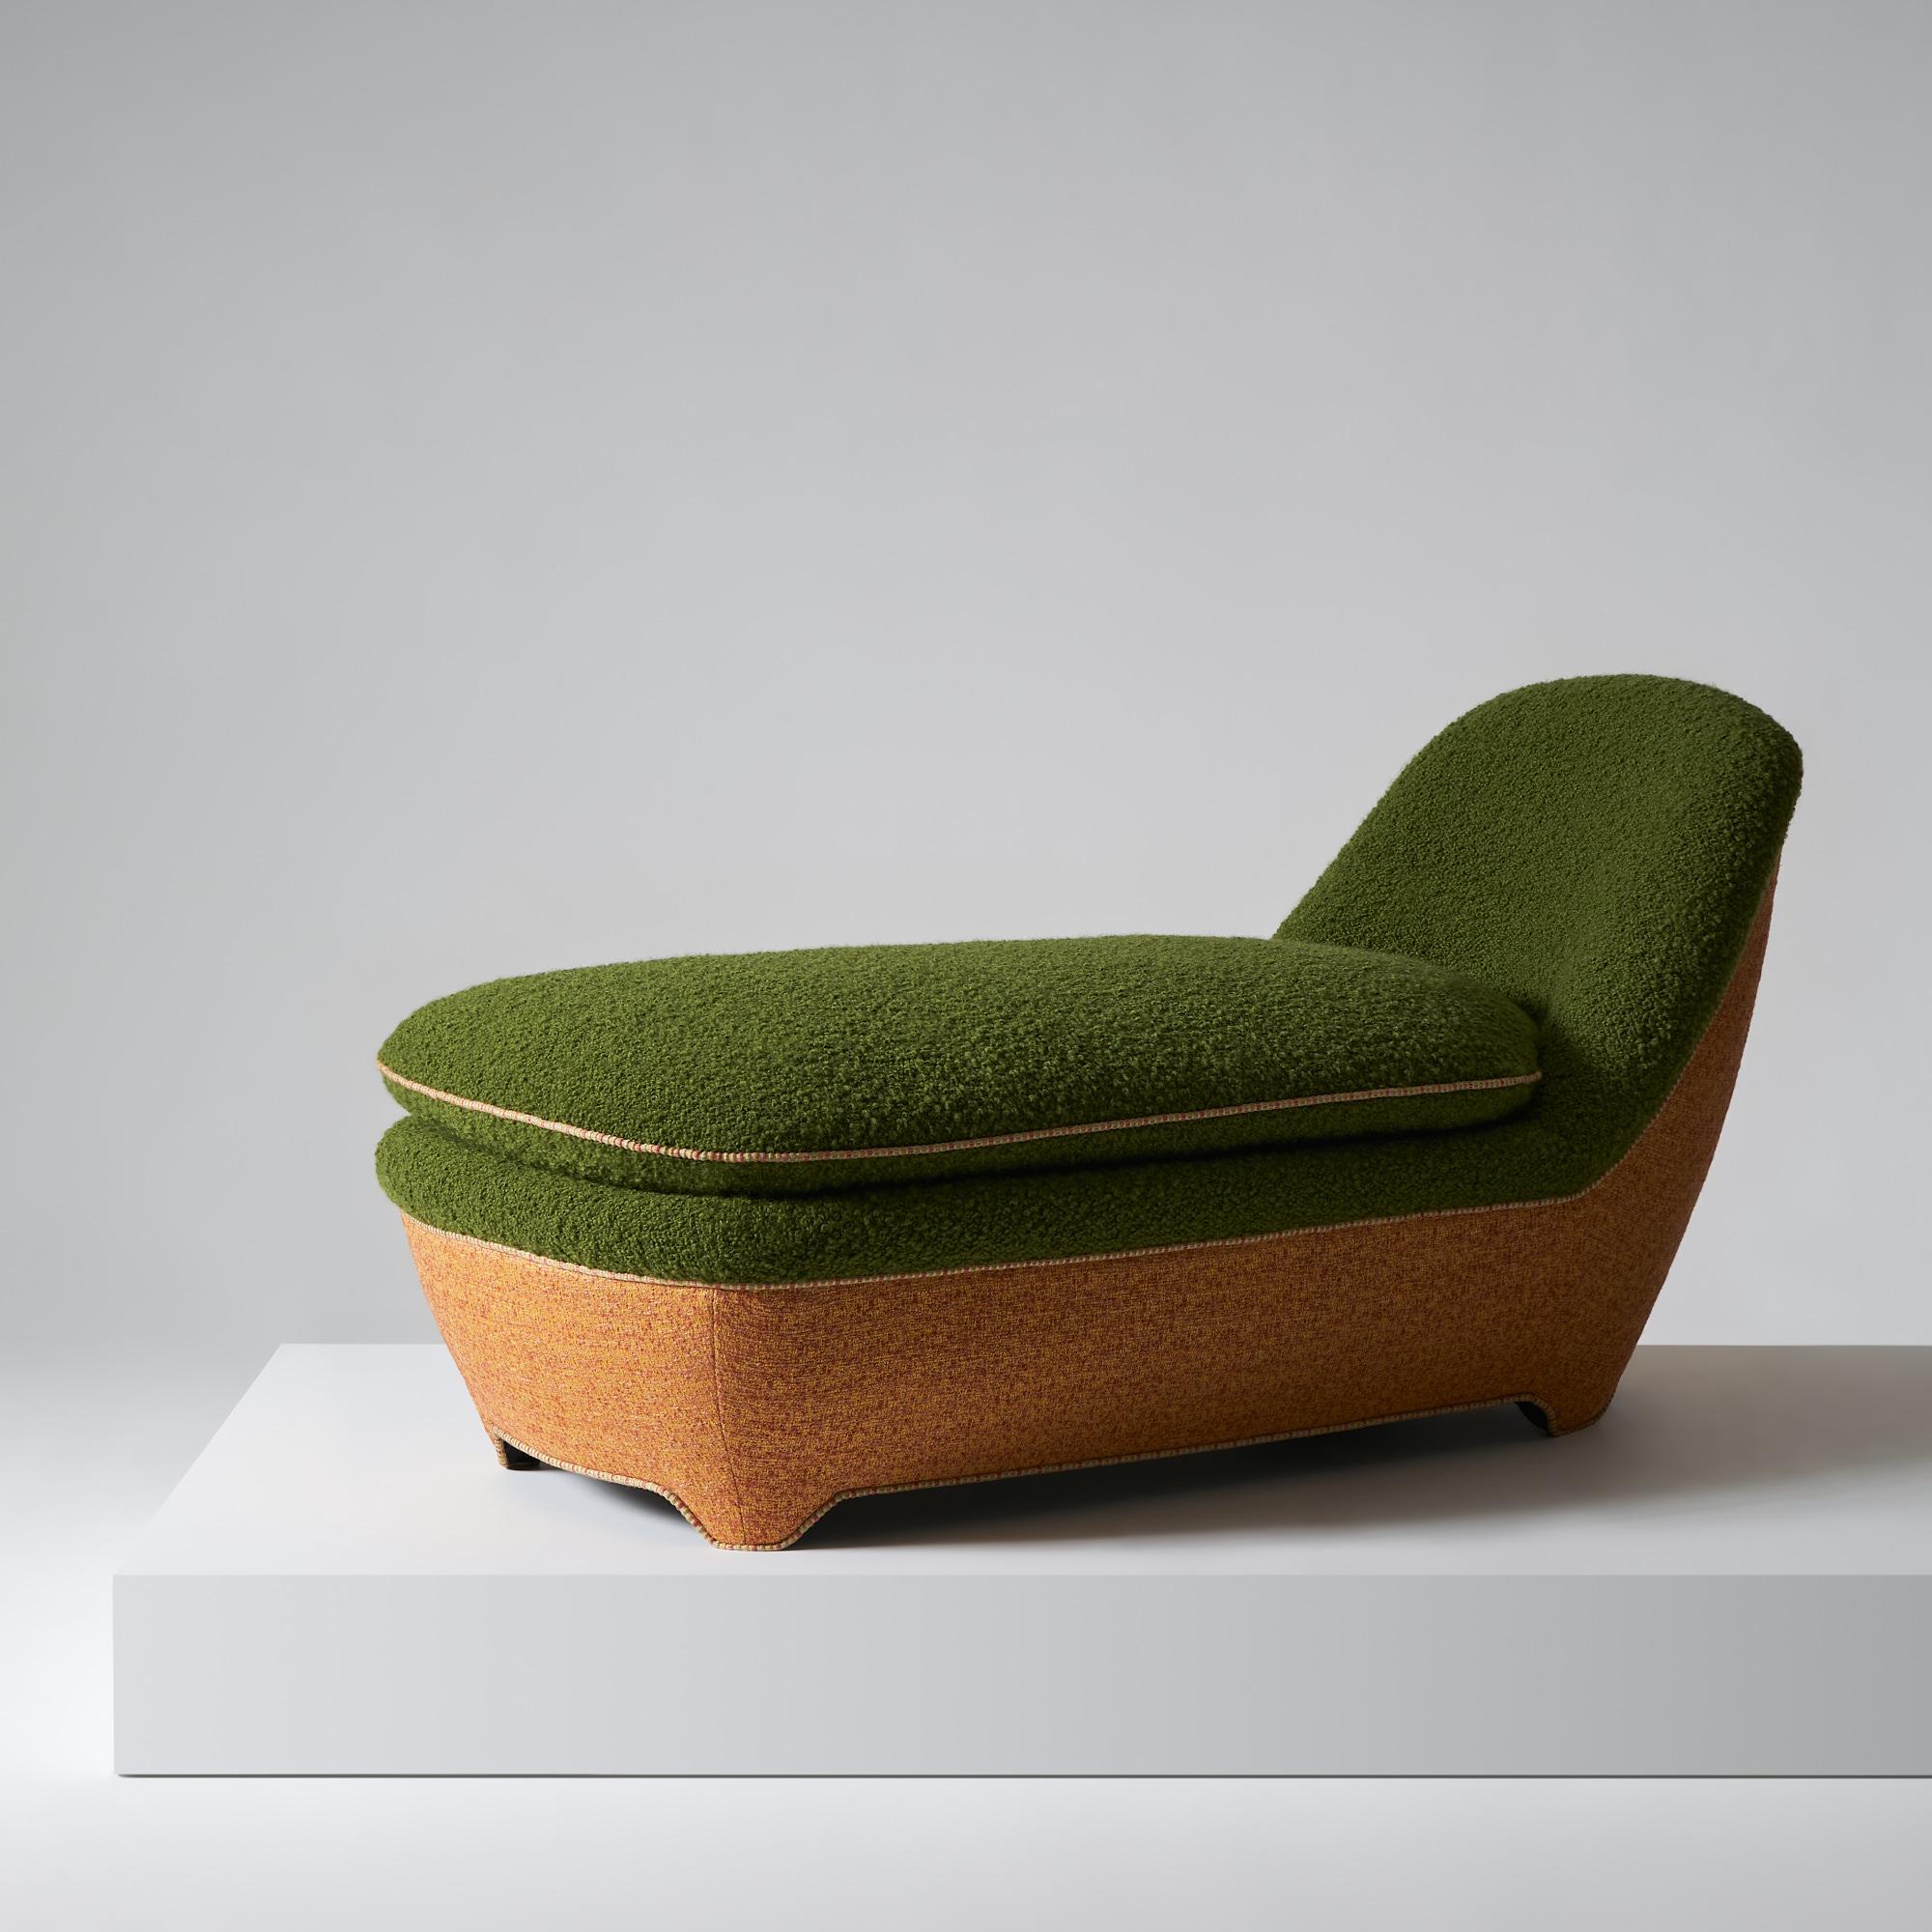 And objects, product design studio founded by Martin Brudnizki and Nick Jeanes based in London.

The Candover daybed is crafted from a solid beech timber frame and has an elevated cushion seat. Crafted by hand the daybed is wrapped to the floor in